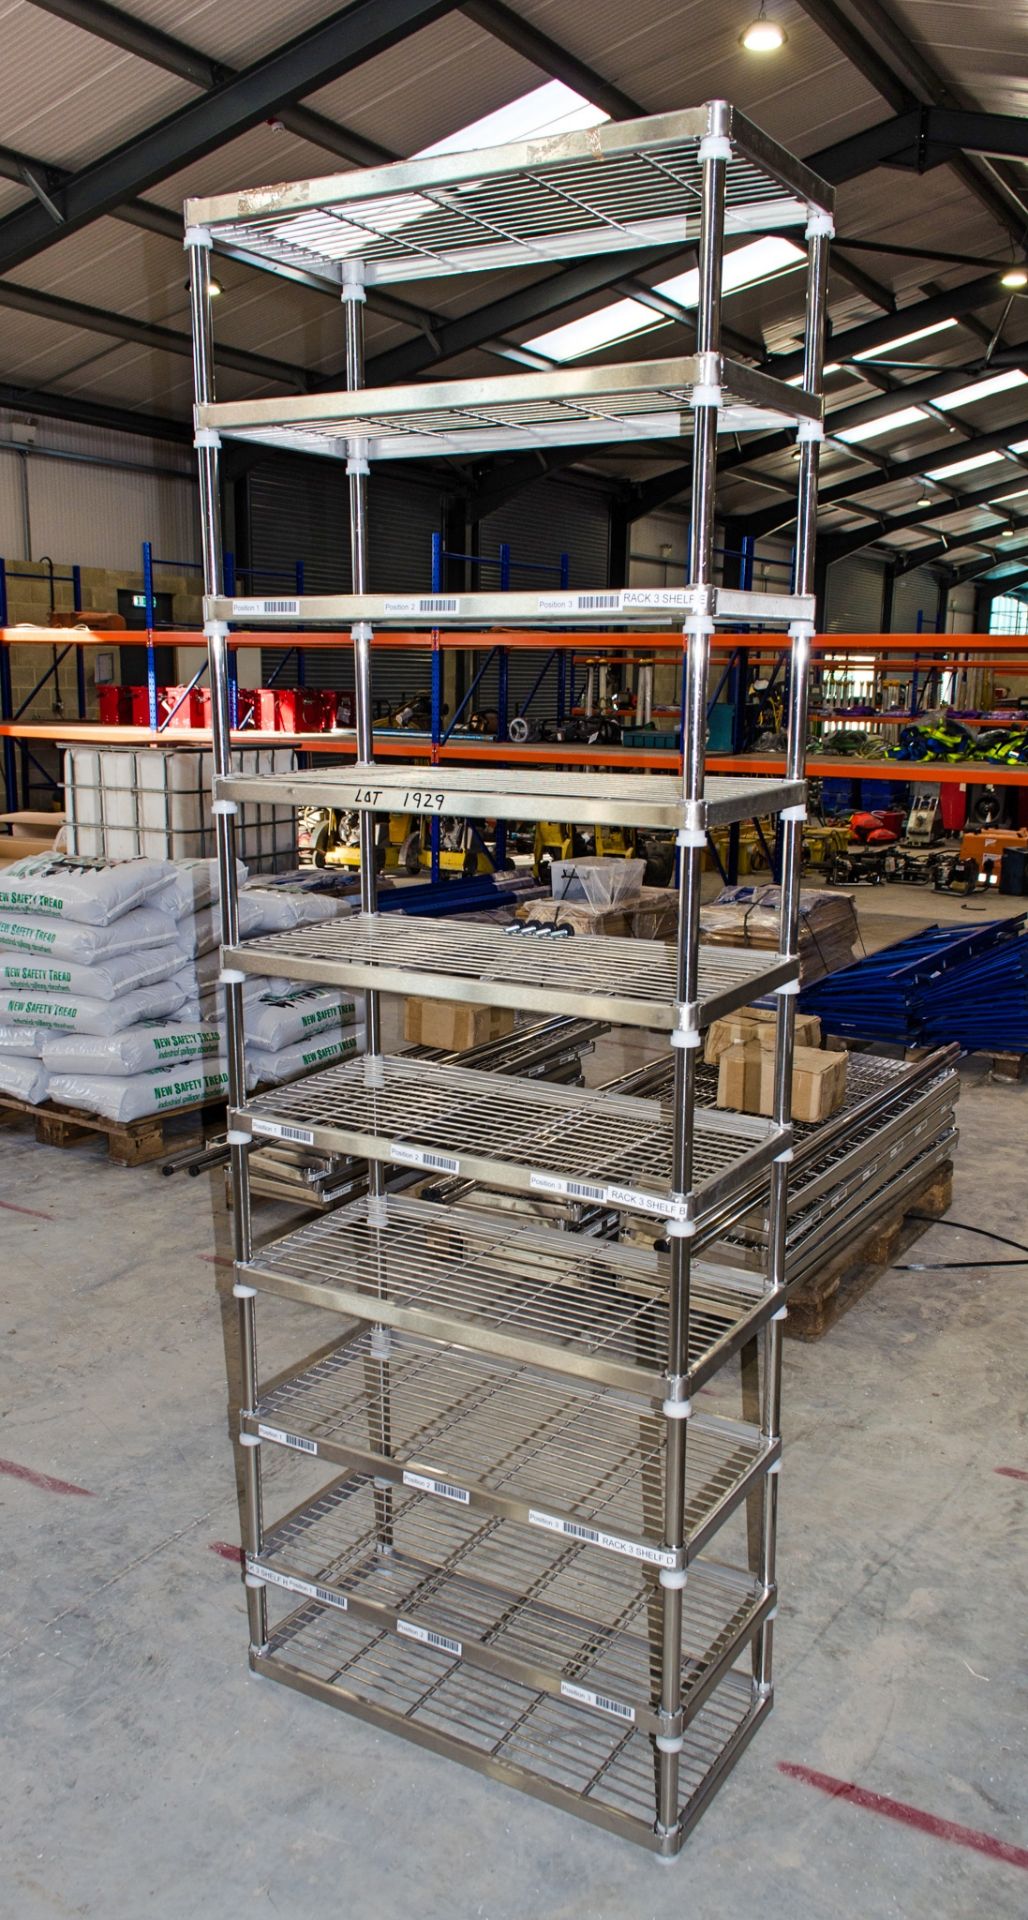 Stainless steel shelving unit with 10 shelves 220 cm high x 75 cm wide x 40 cm deep